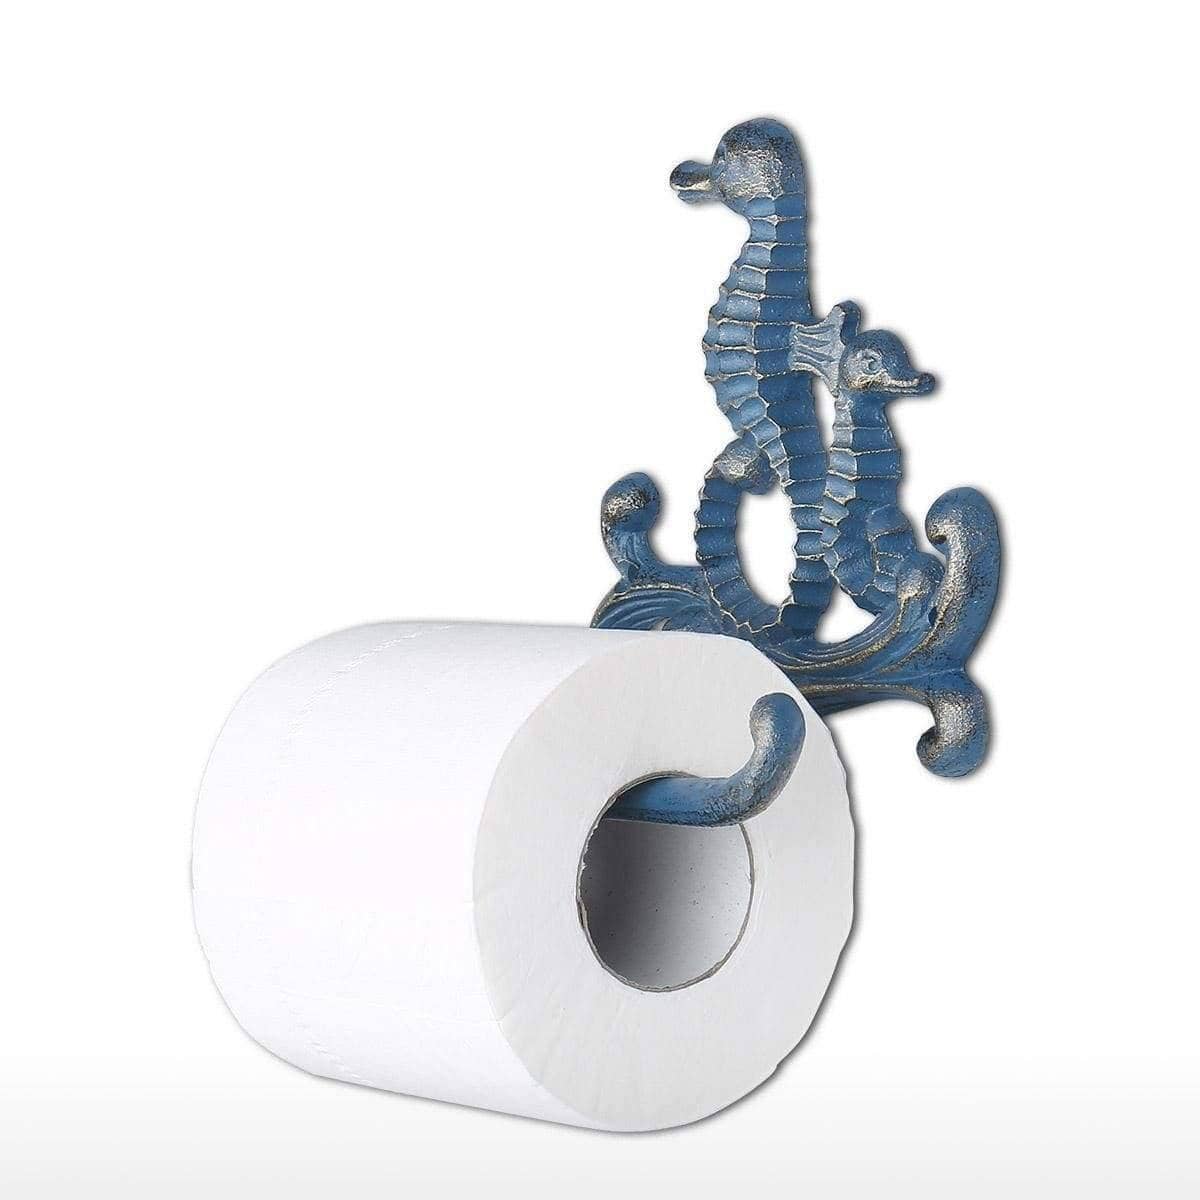 Welcome Toilet Paper Roll Holder Stand - Stylish & Practical Bathroom Accessory